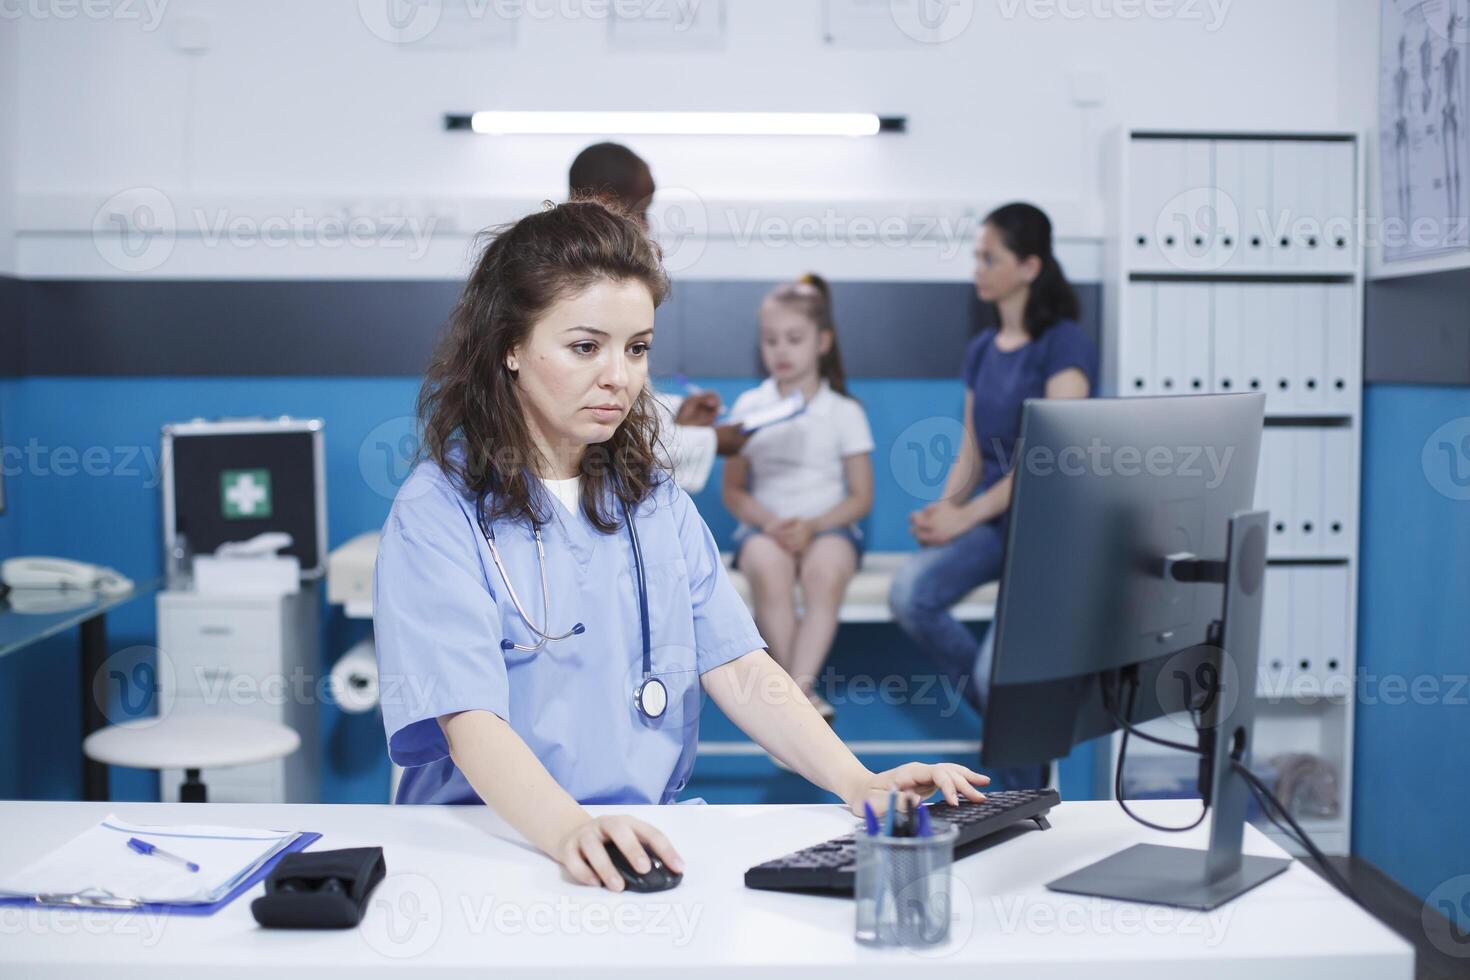 Caucasian female nurse using the computer desktop, to verify patient information and appointments, while male doctor assists mother and daughter. A scene of healthcare and communication. photo